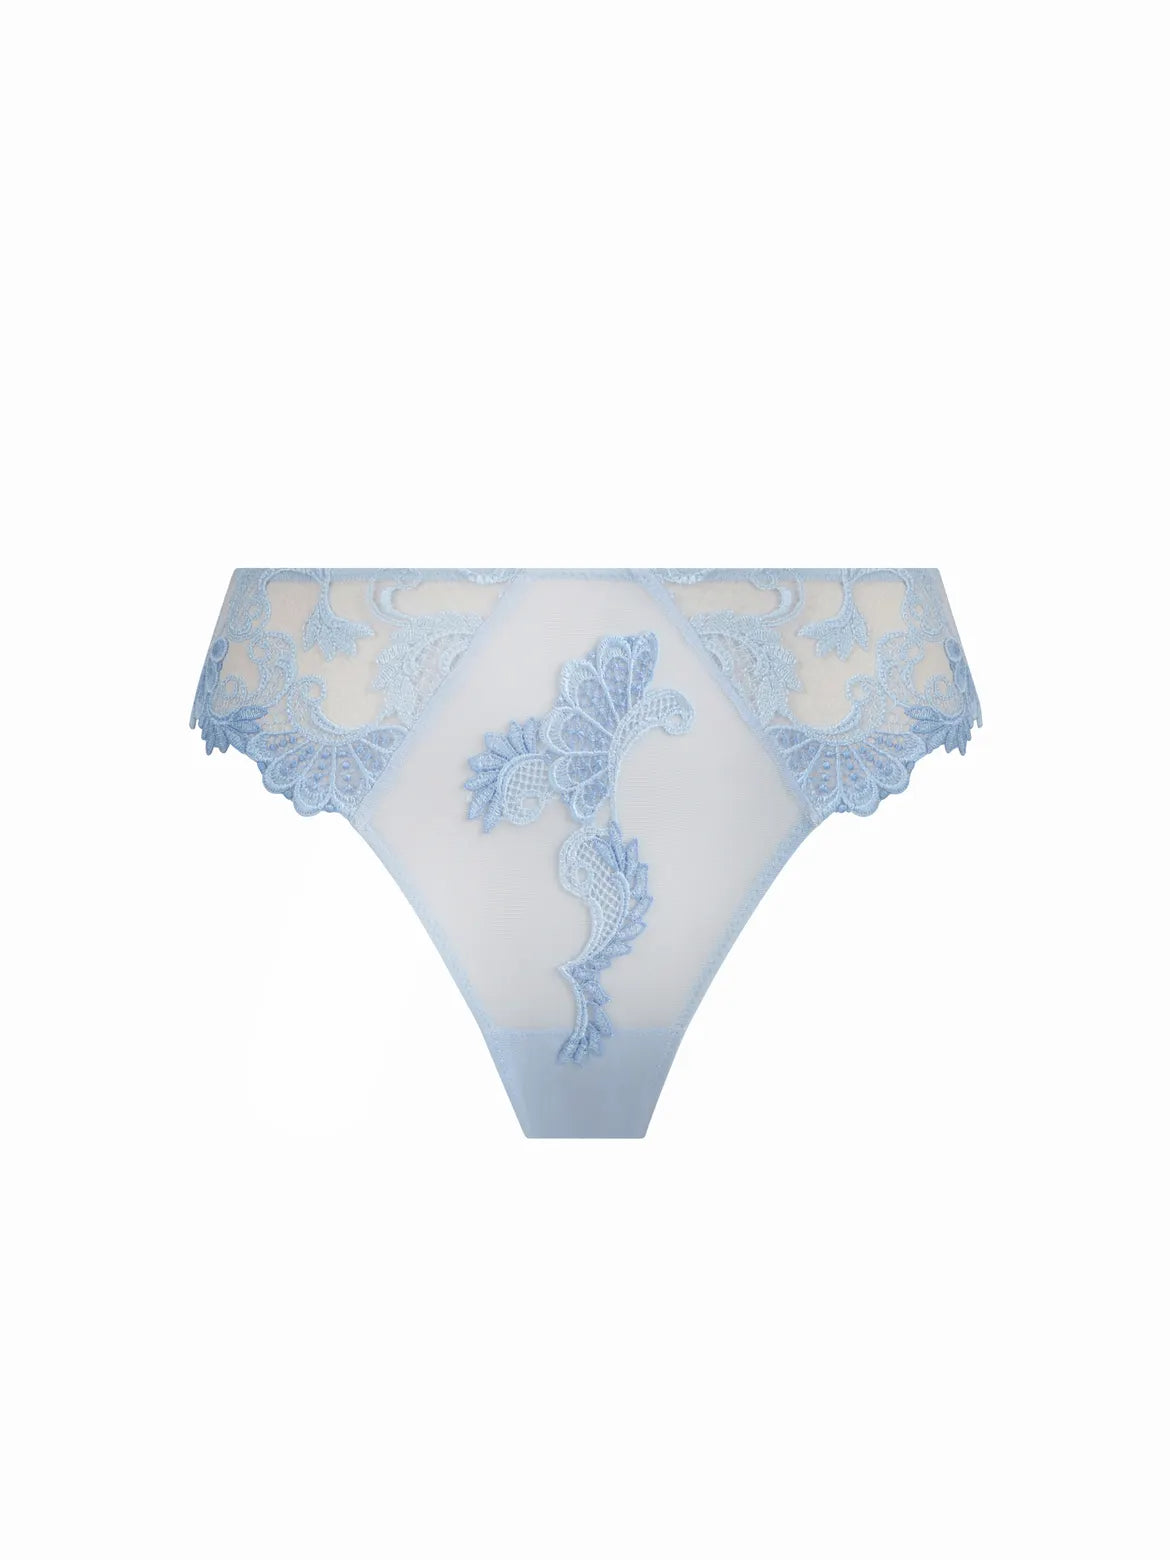 Lise Charmel Dressing Floral Embroidered Tulle Low-rise Briefs in Pink